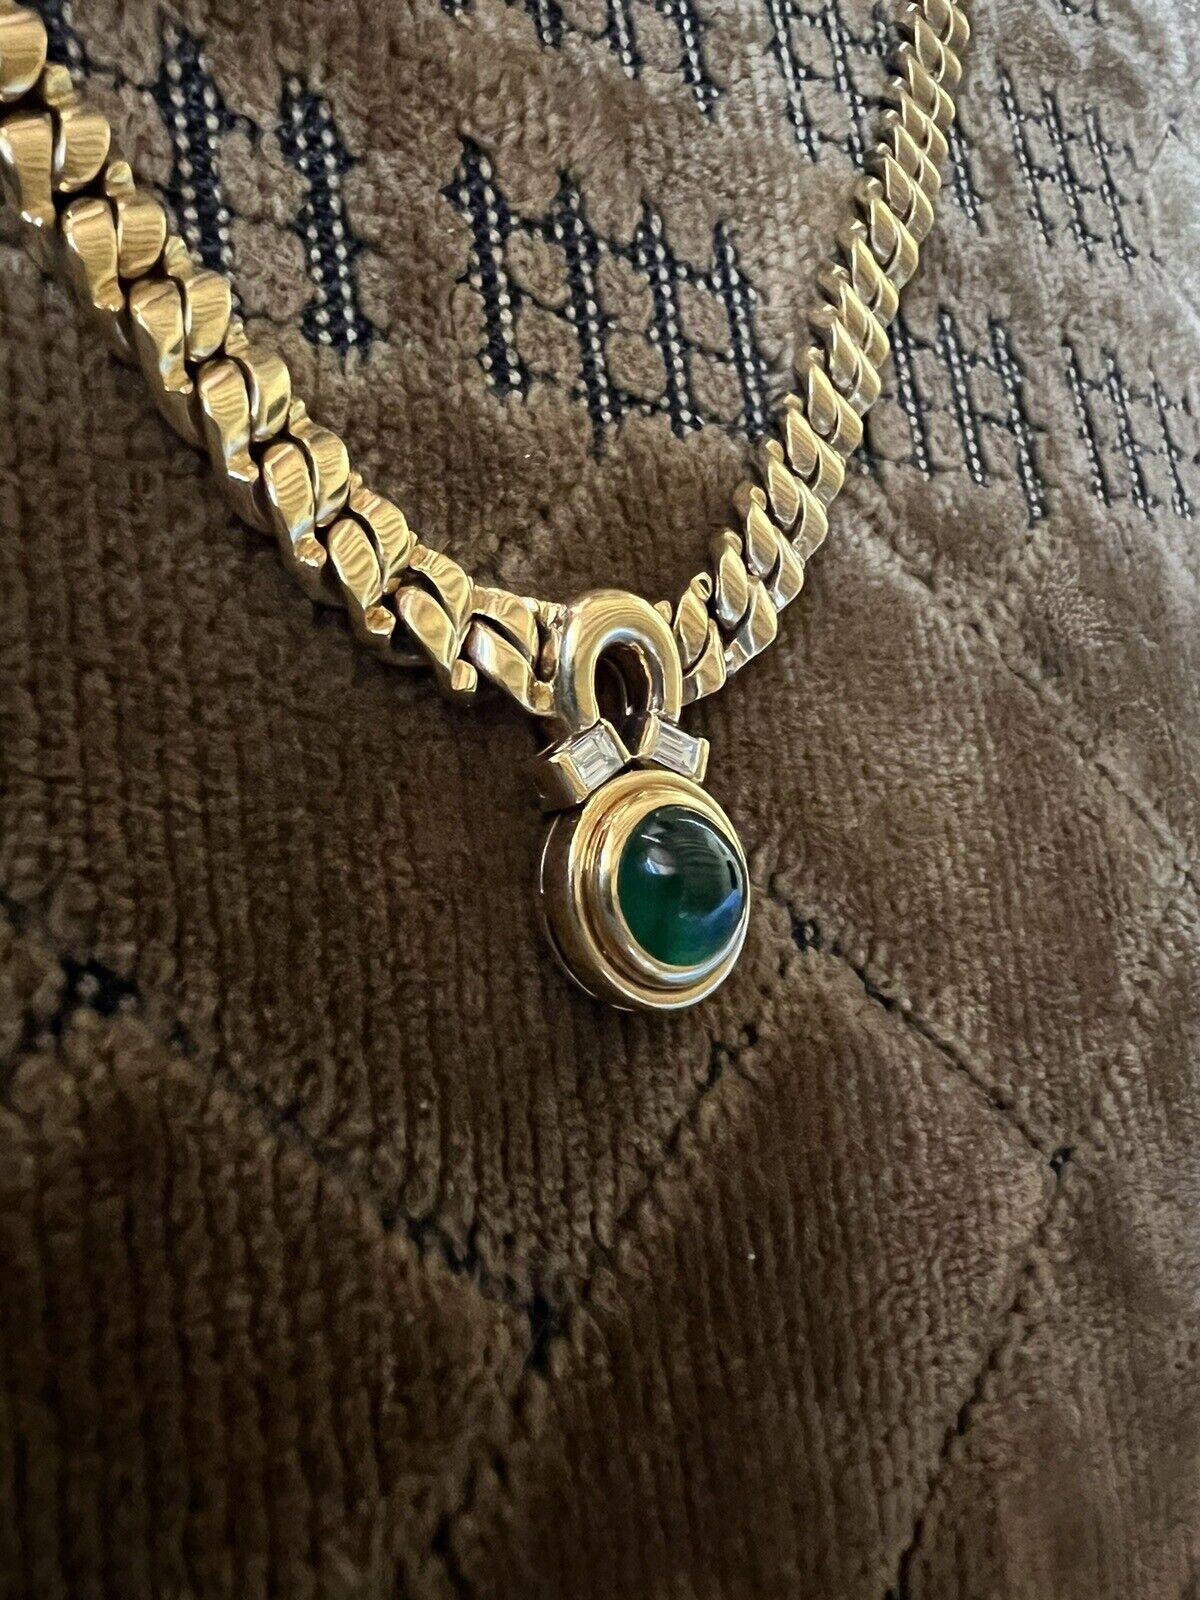 BVLGARI ITALY 18k Yellow Gold, Baguette Diamond & Cabochon Emerald Link Necklace For Sale 3